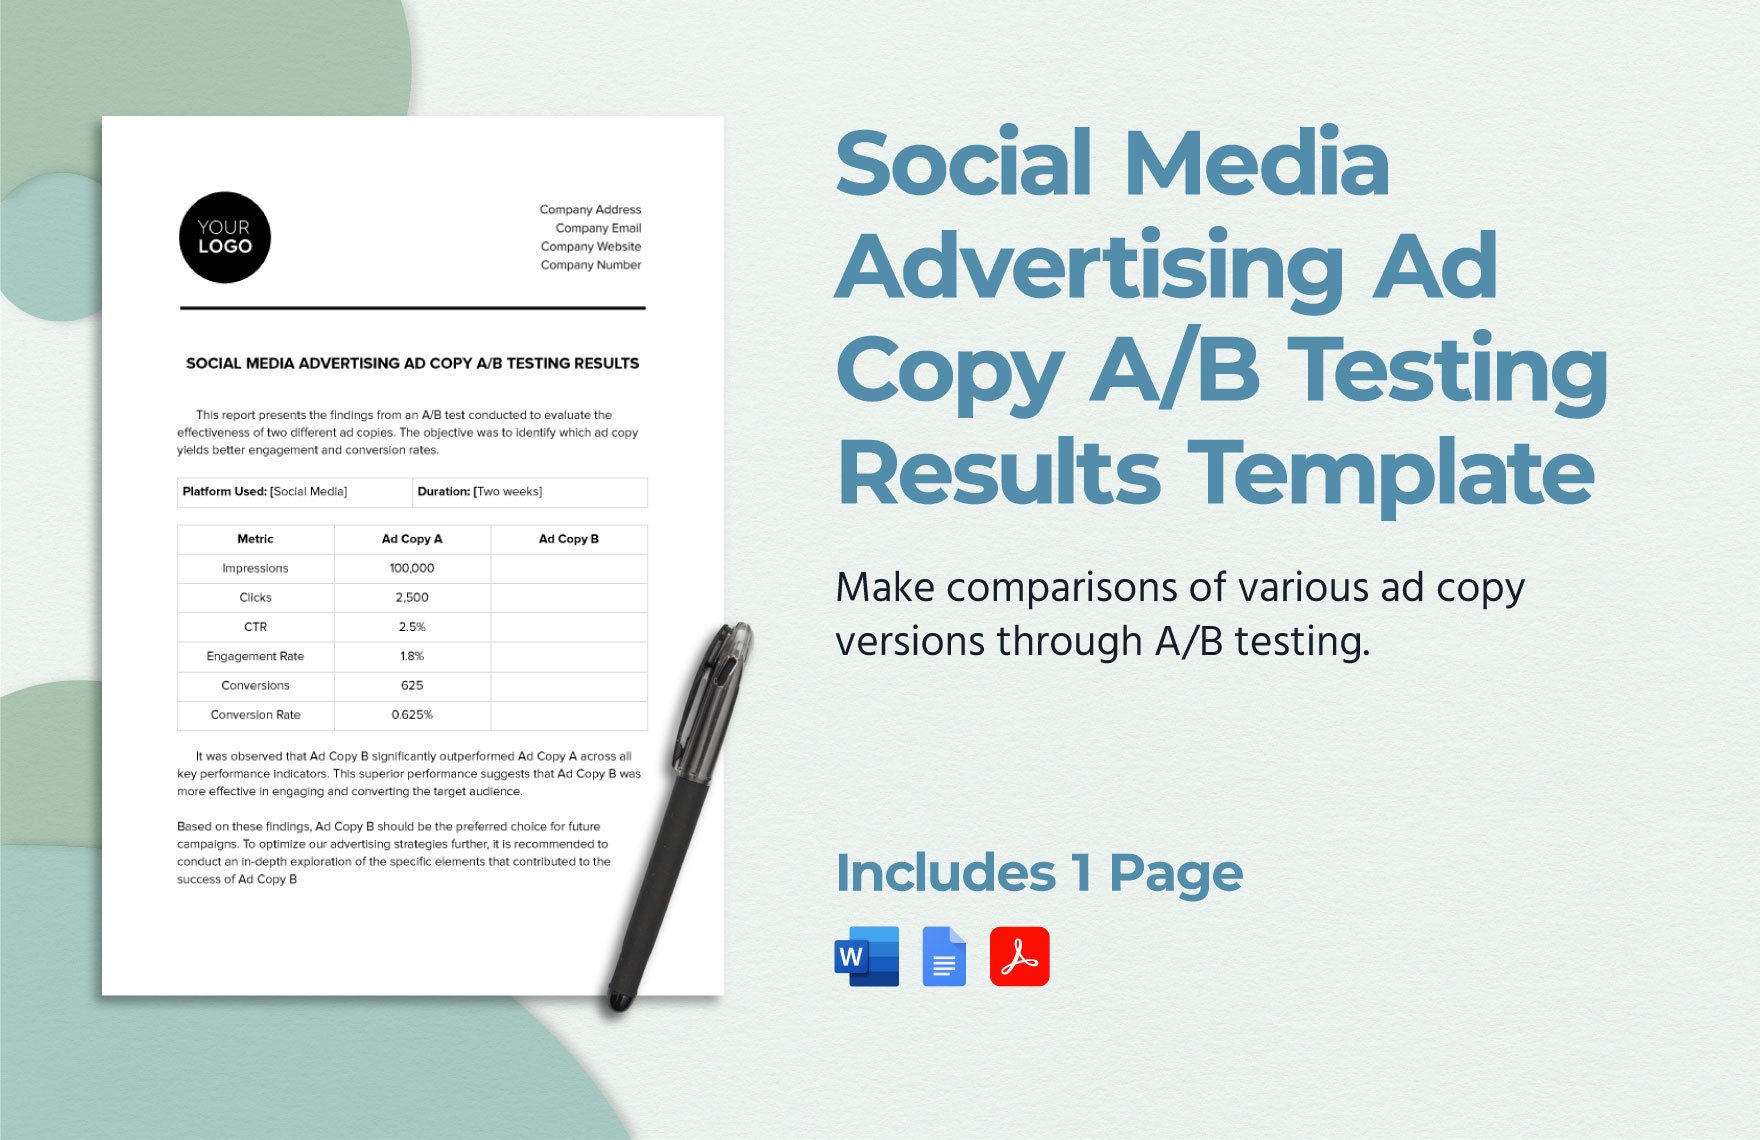 Social Media Advertising Ad Copy A/B Testing Results Template in Word, Google Docs, PDF